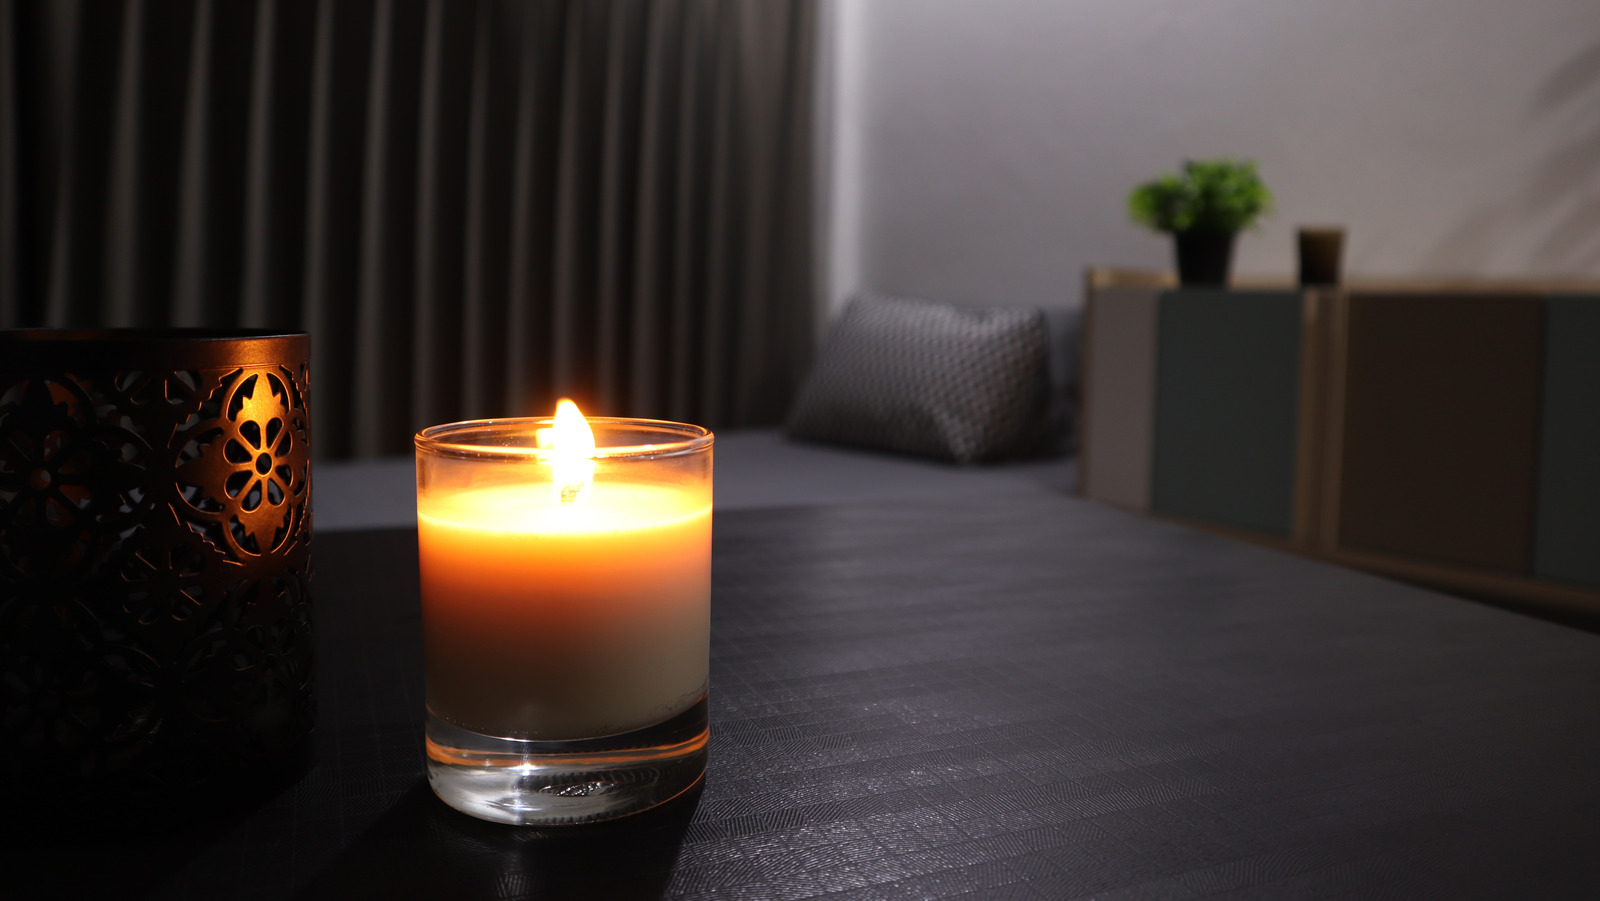 Why Burning Scented Candles Could Be Hazardous To Your Health